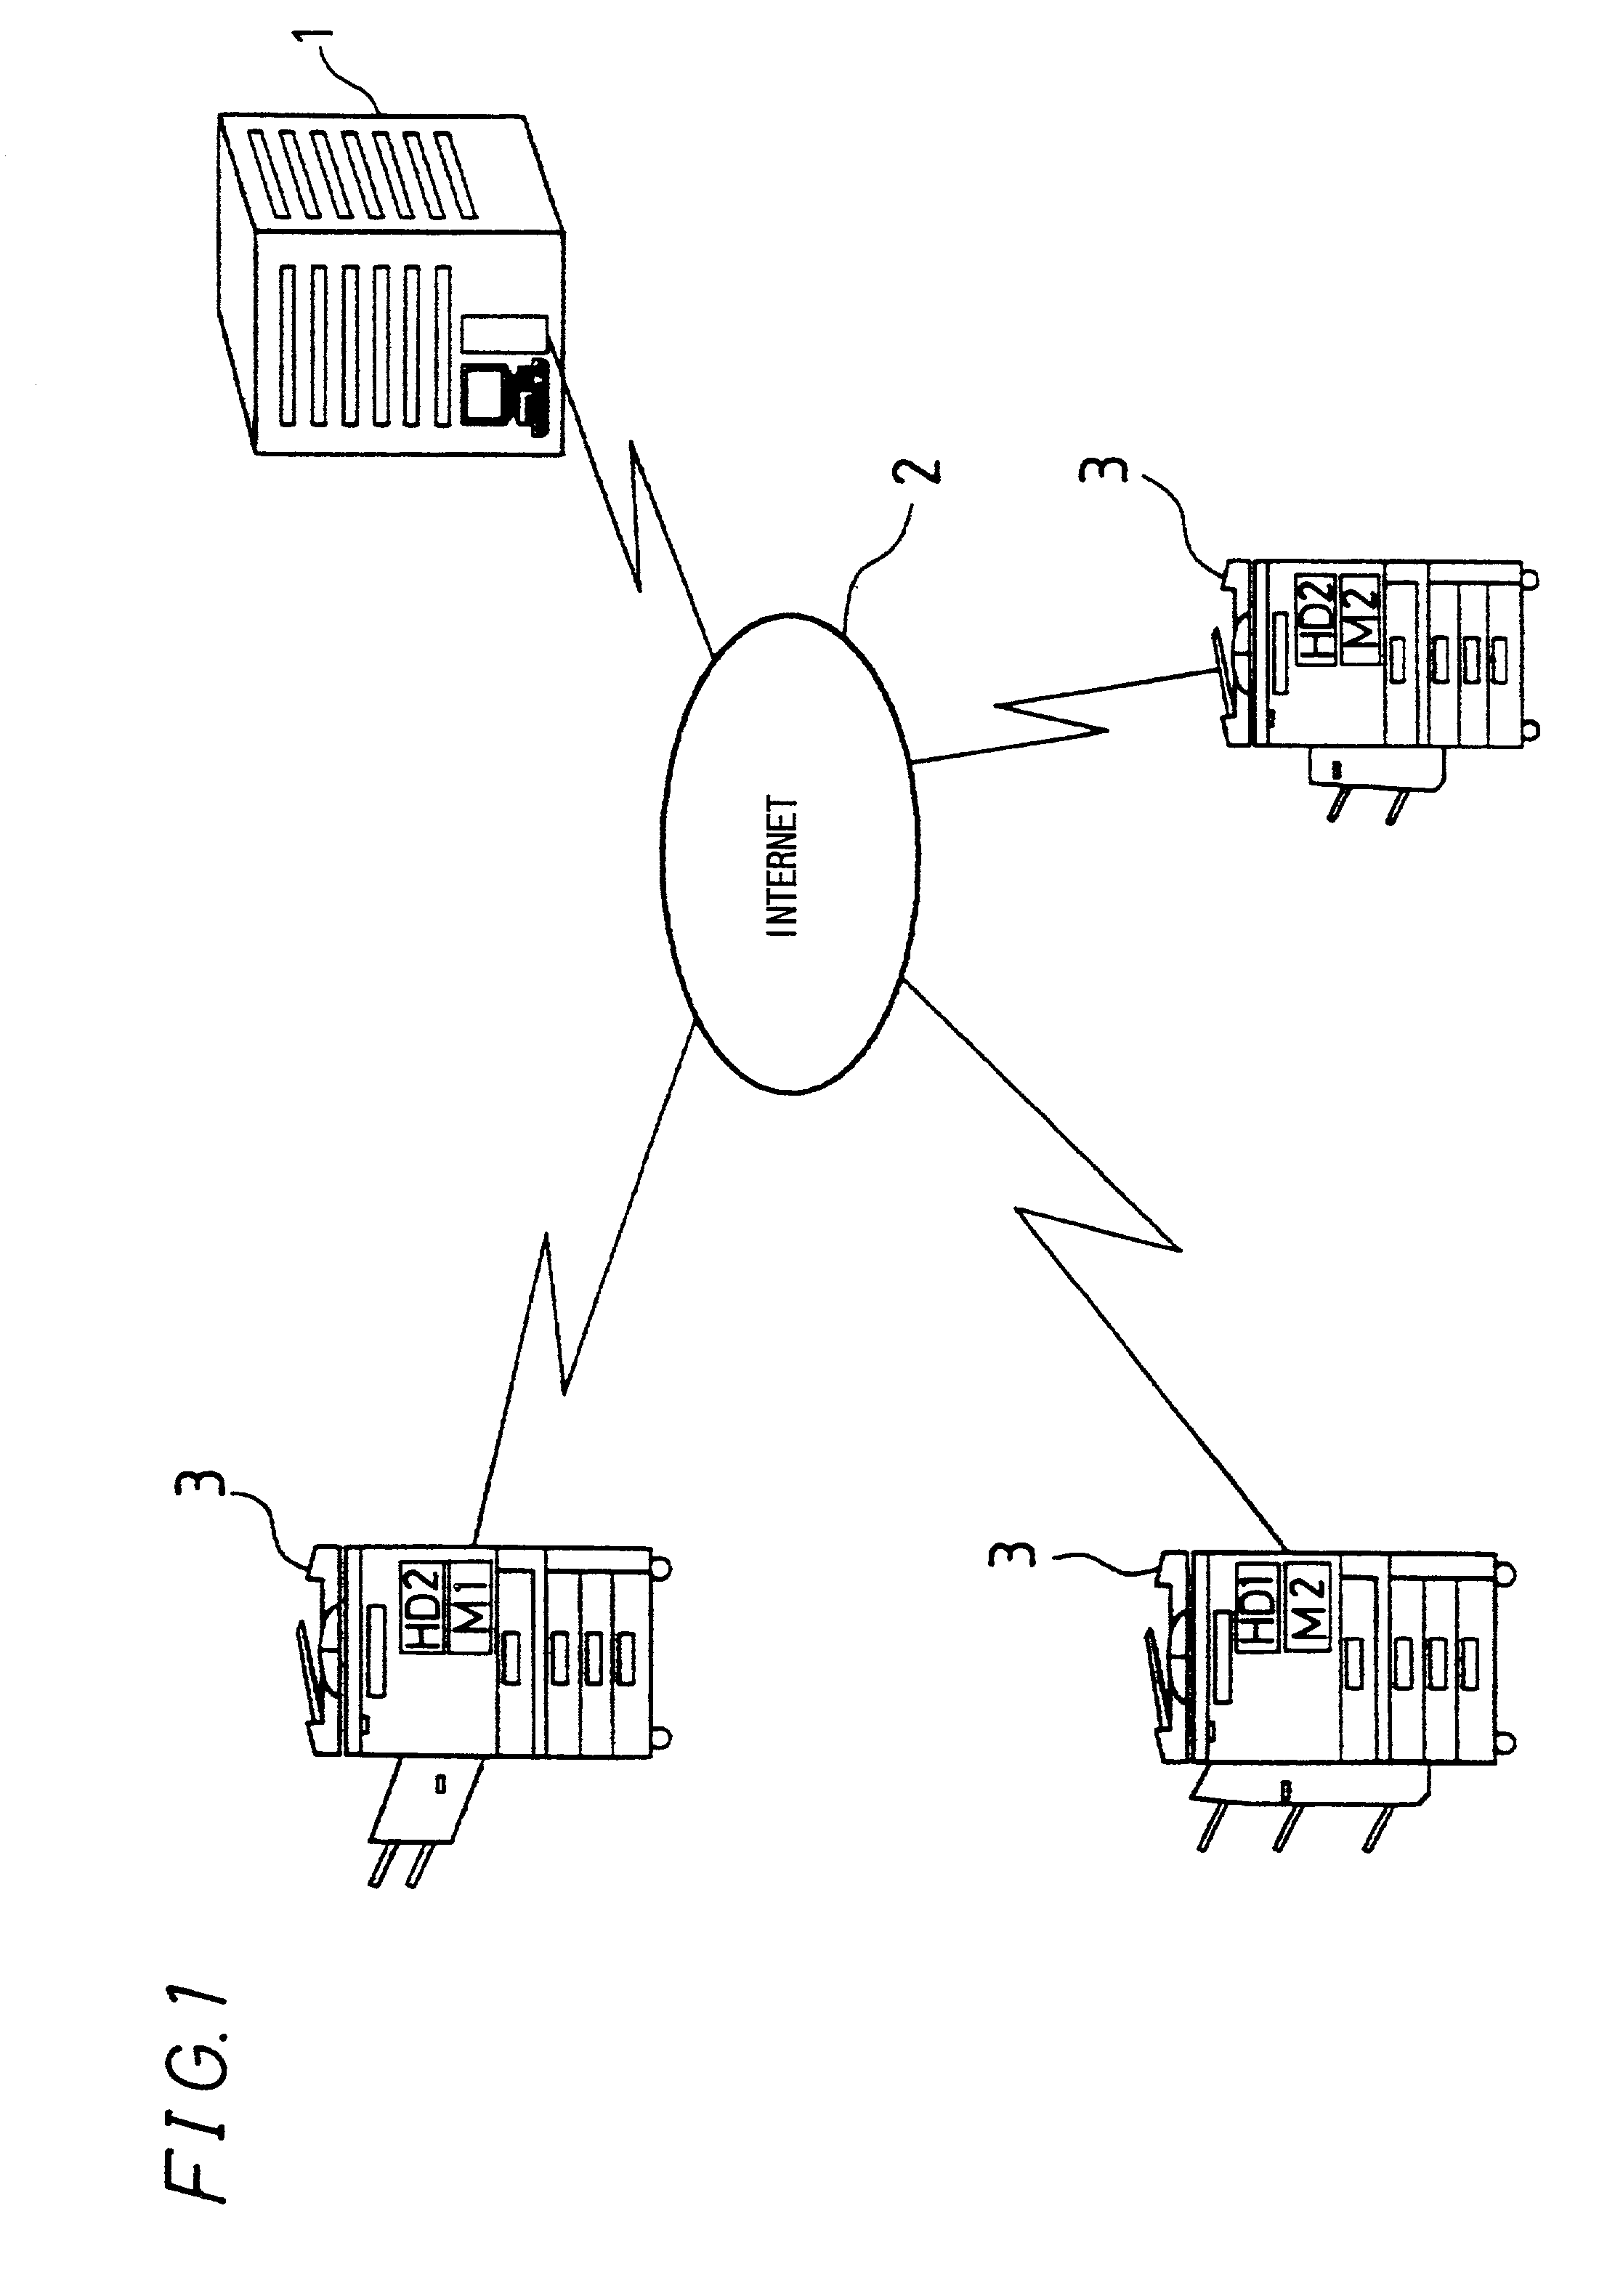 System for supplying a program from a server to a printing device through a network based on operating environment characteristics of installed optional units